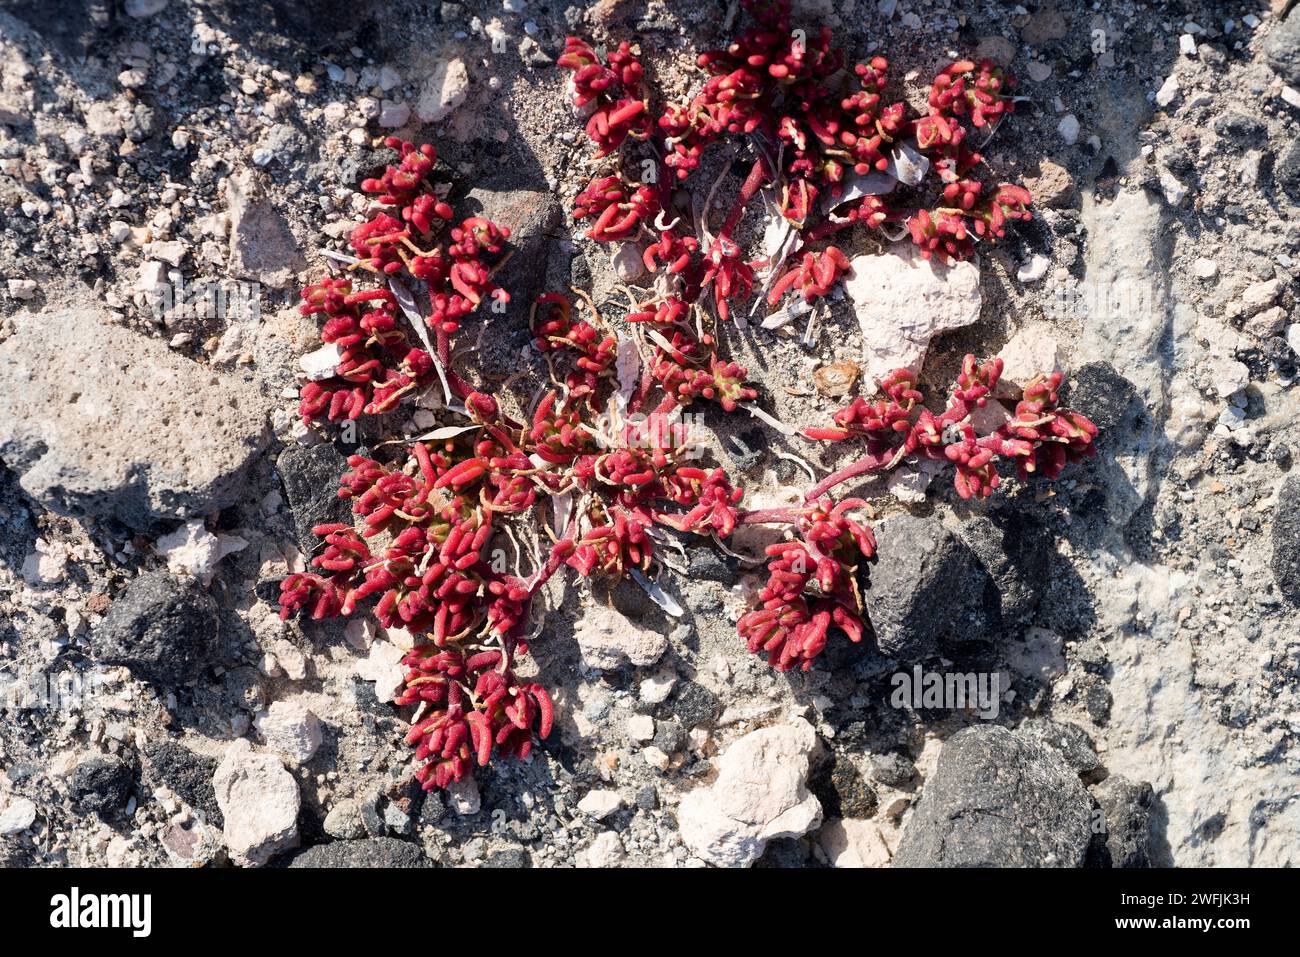 Slenderleaf iceplant (Mesembryanthemum nodiflorum) is a suculent plant native to eastern Mediterranean Basin, southeastern Spain and  South Africa but Stock Photo